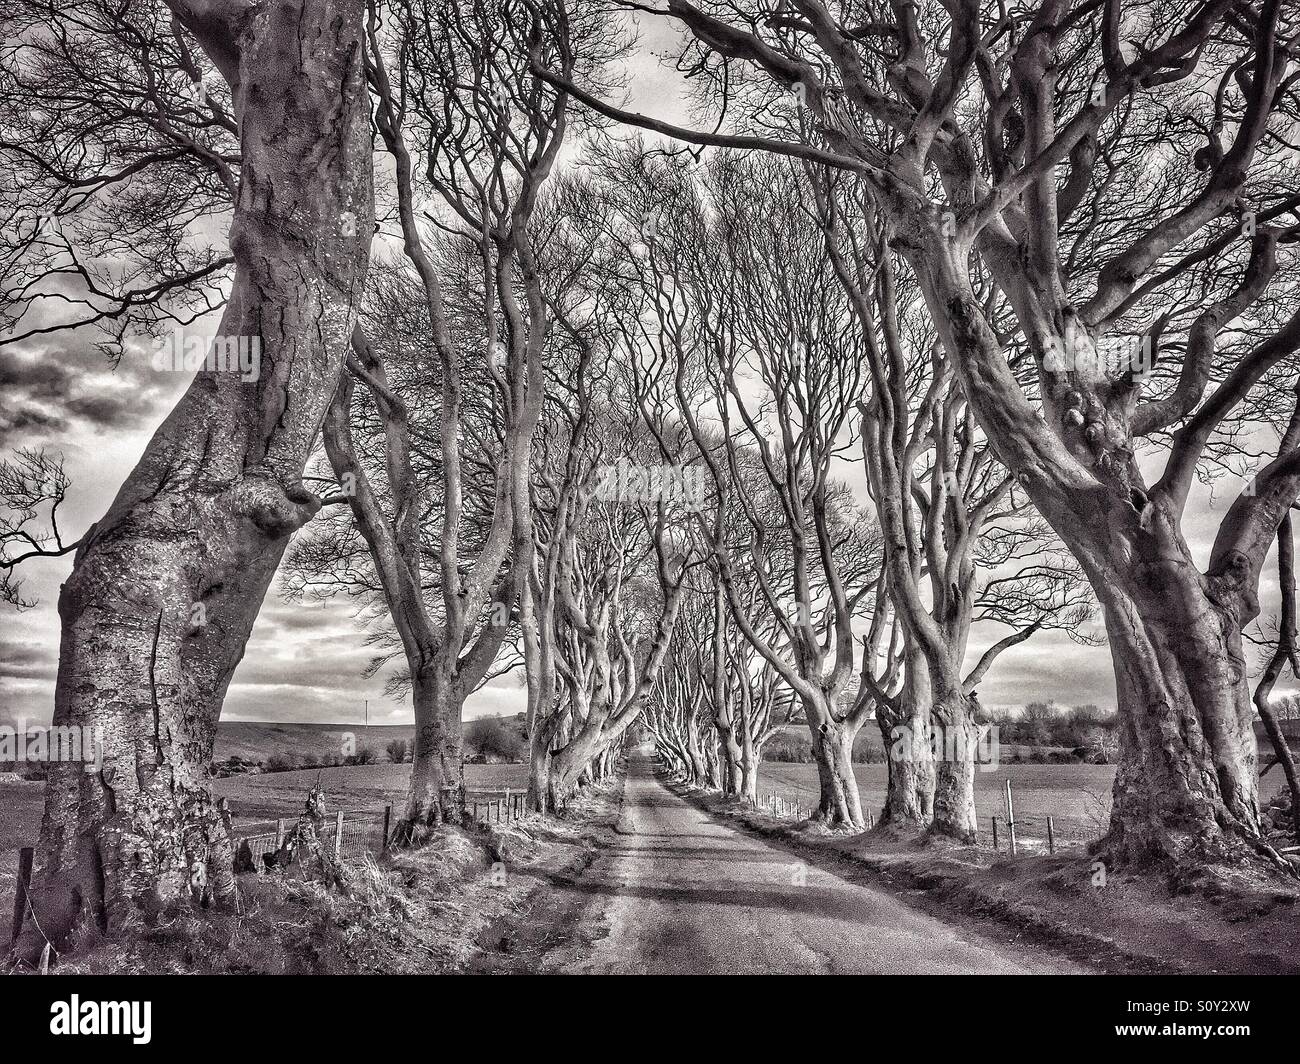 An 18th Century Avenue of Beech Trees known as 'THE DARK HEDGES.' Situated in Co. Antrim near Stranocum and Armoy in Northern Ireland, they have been used as a film location in THE GAME OF THRONES. Stock Photo